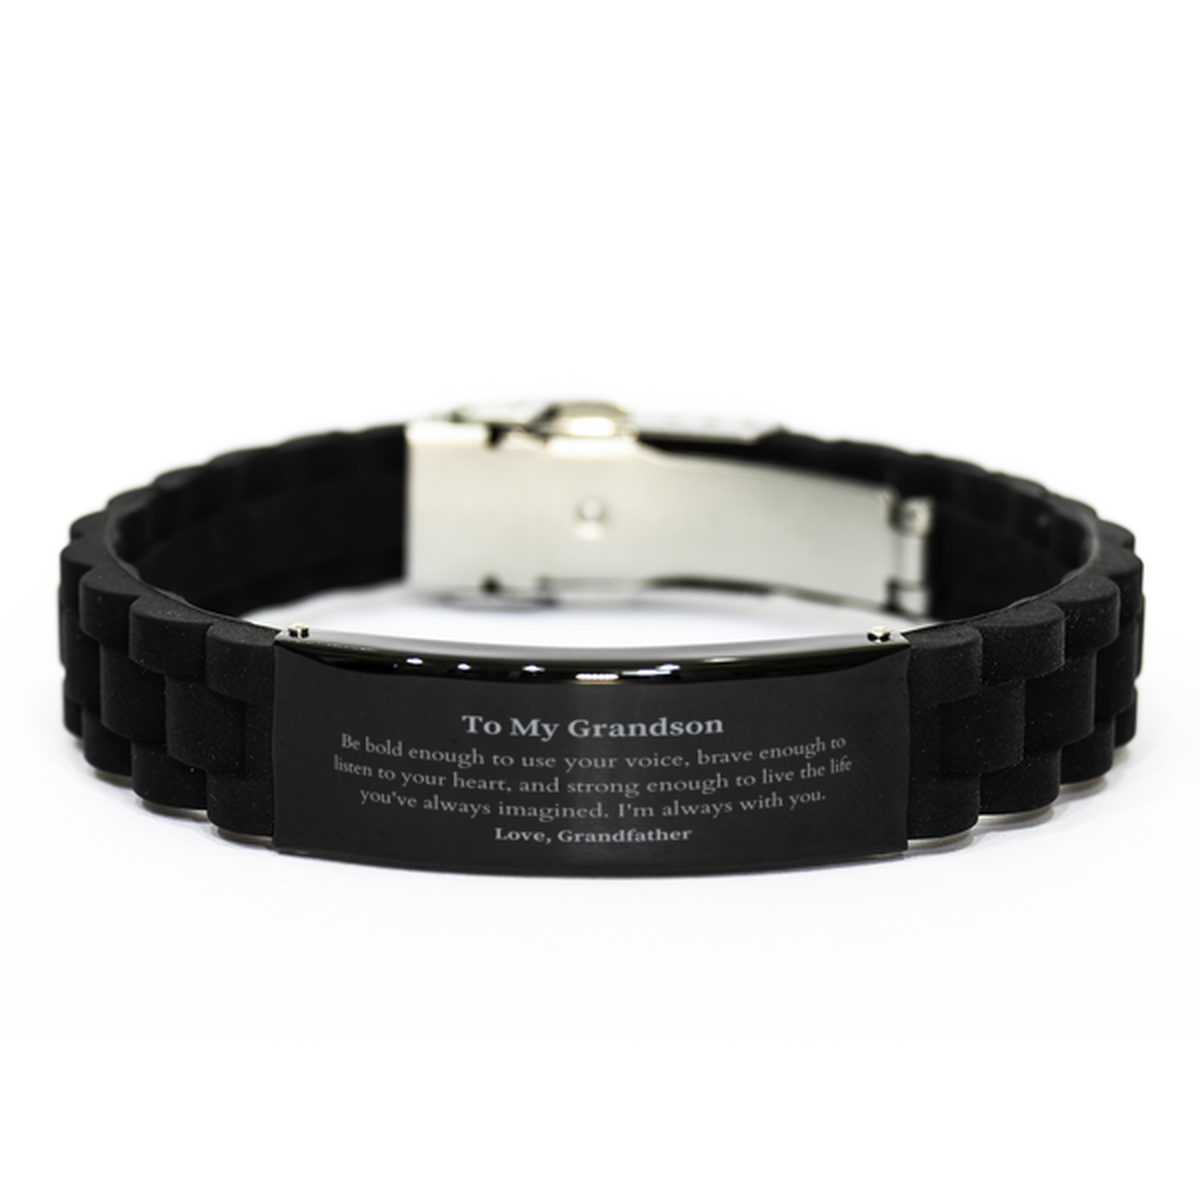 Keepsake Grandson Black Glidelock Clasp Bracelet Gift Idea Graduation Christmas Birthday Grandson from Grandfather, Grandson Be bold enough to use your voice, brave enough to listen to your heart. Love, Grandfather